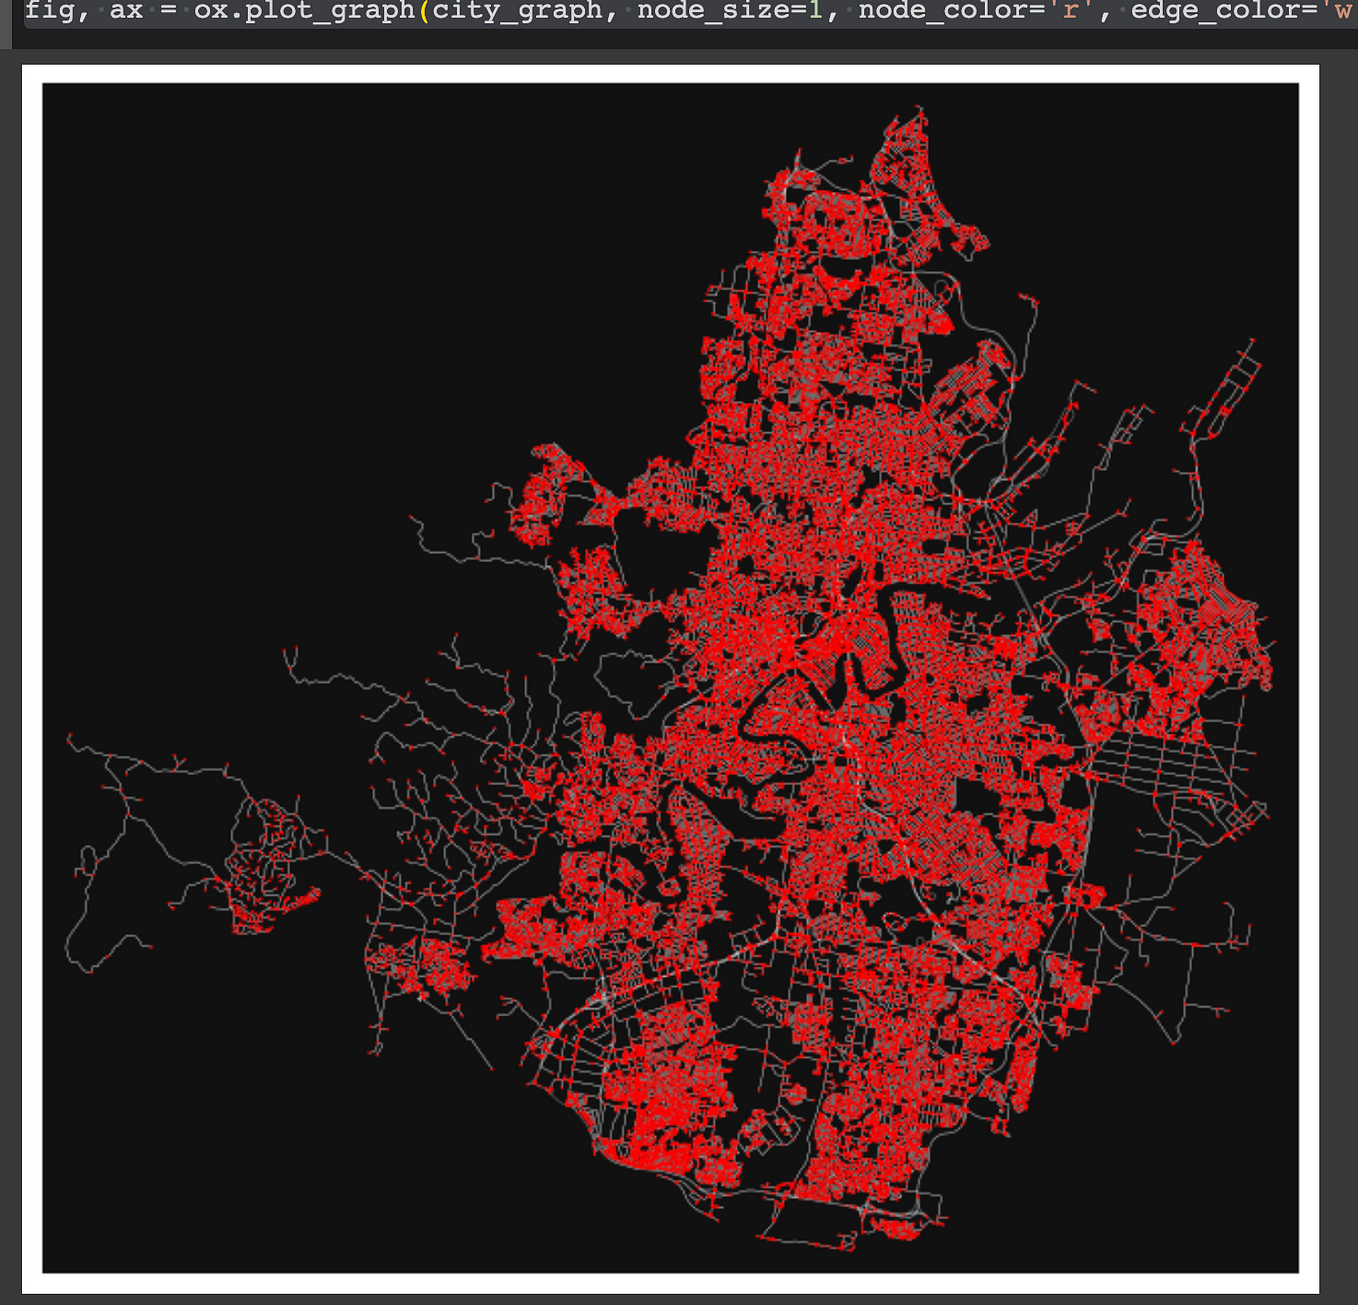 Analyzing Geographic Data with Python — Obtaining the Street Networks